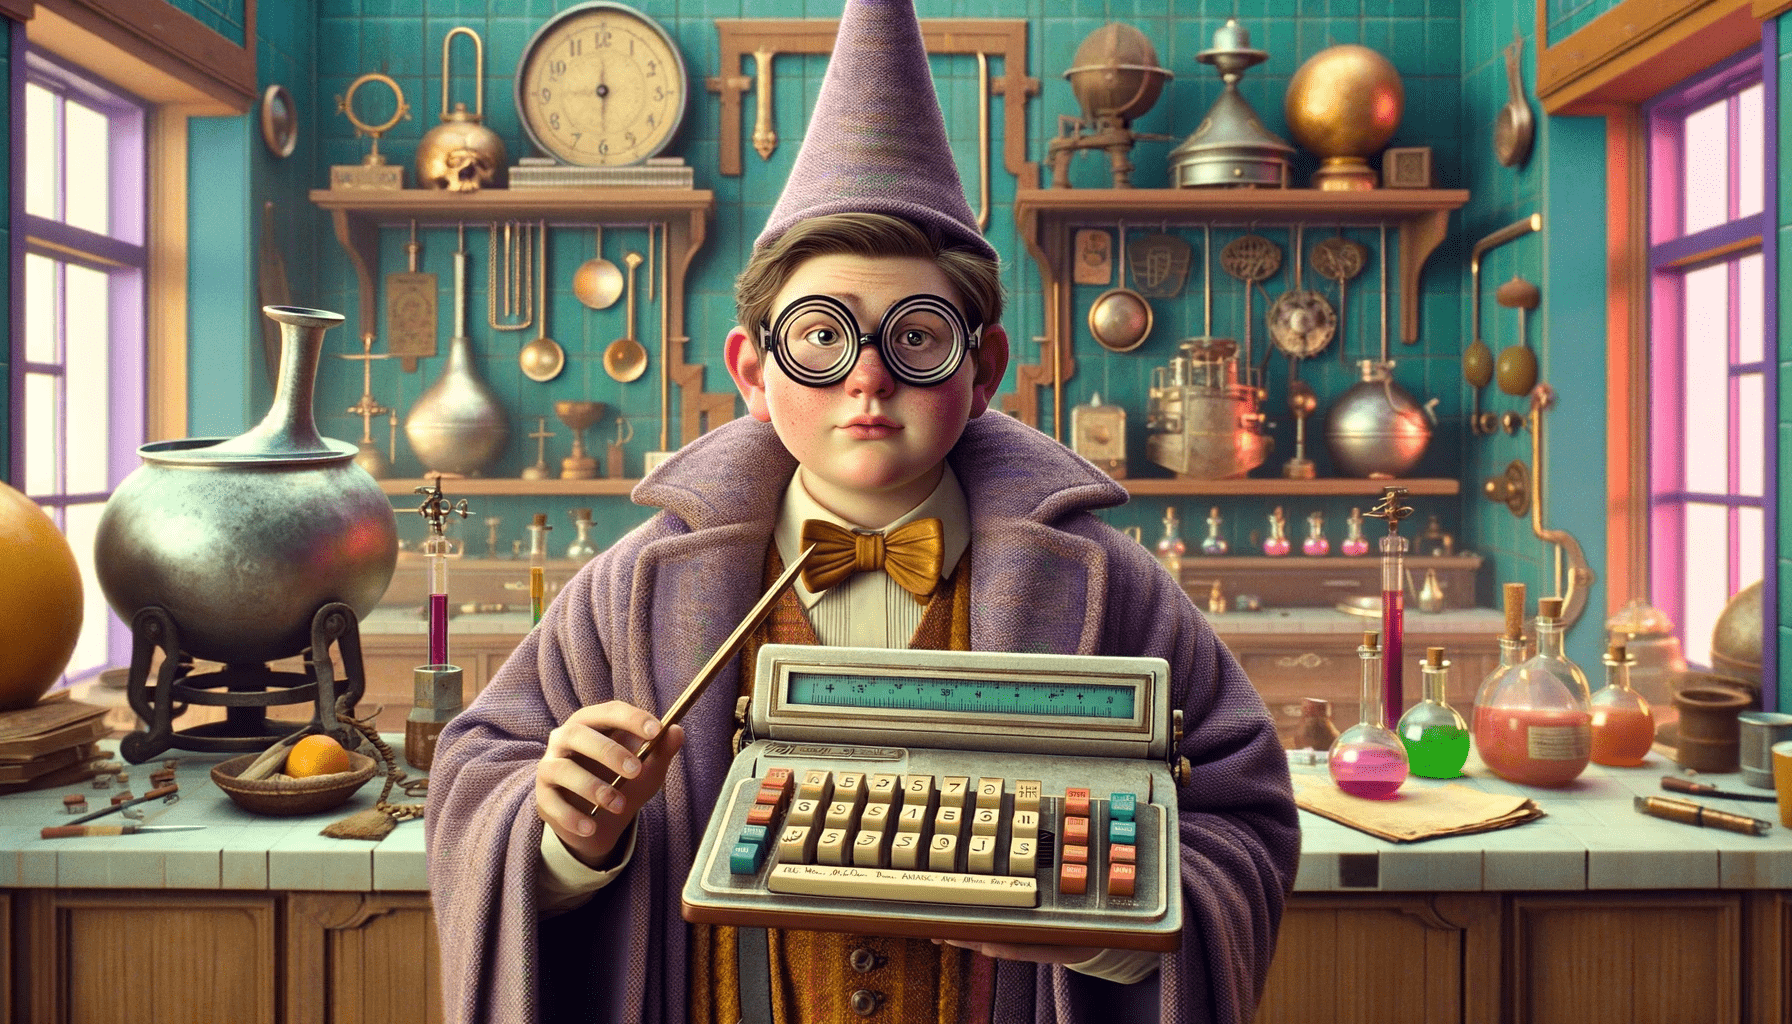 A Wes Anderson-style alchemist's kitchen tailored for artificial intelligence, featuring a pimply-faced boy with his slide rule and antique computer.